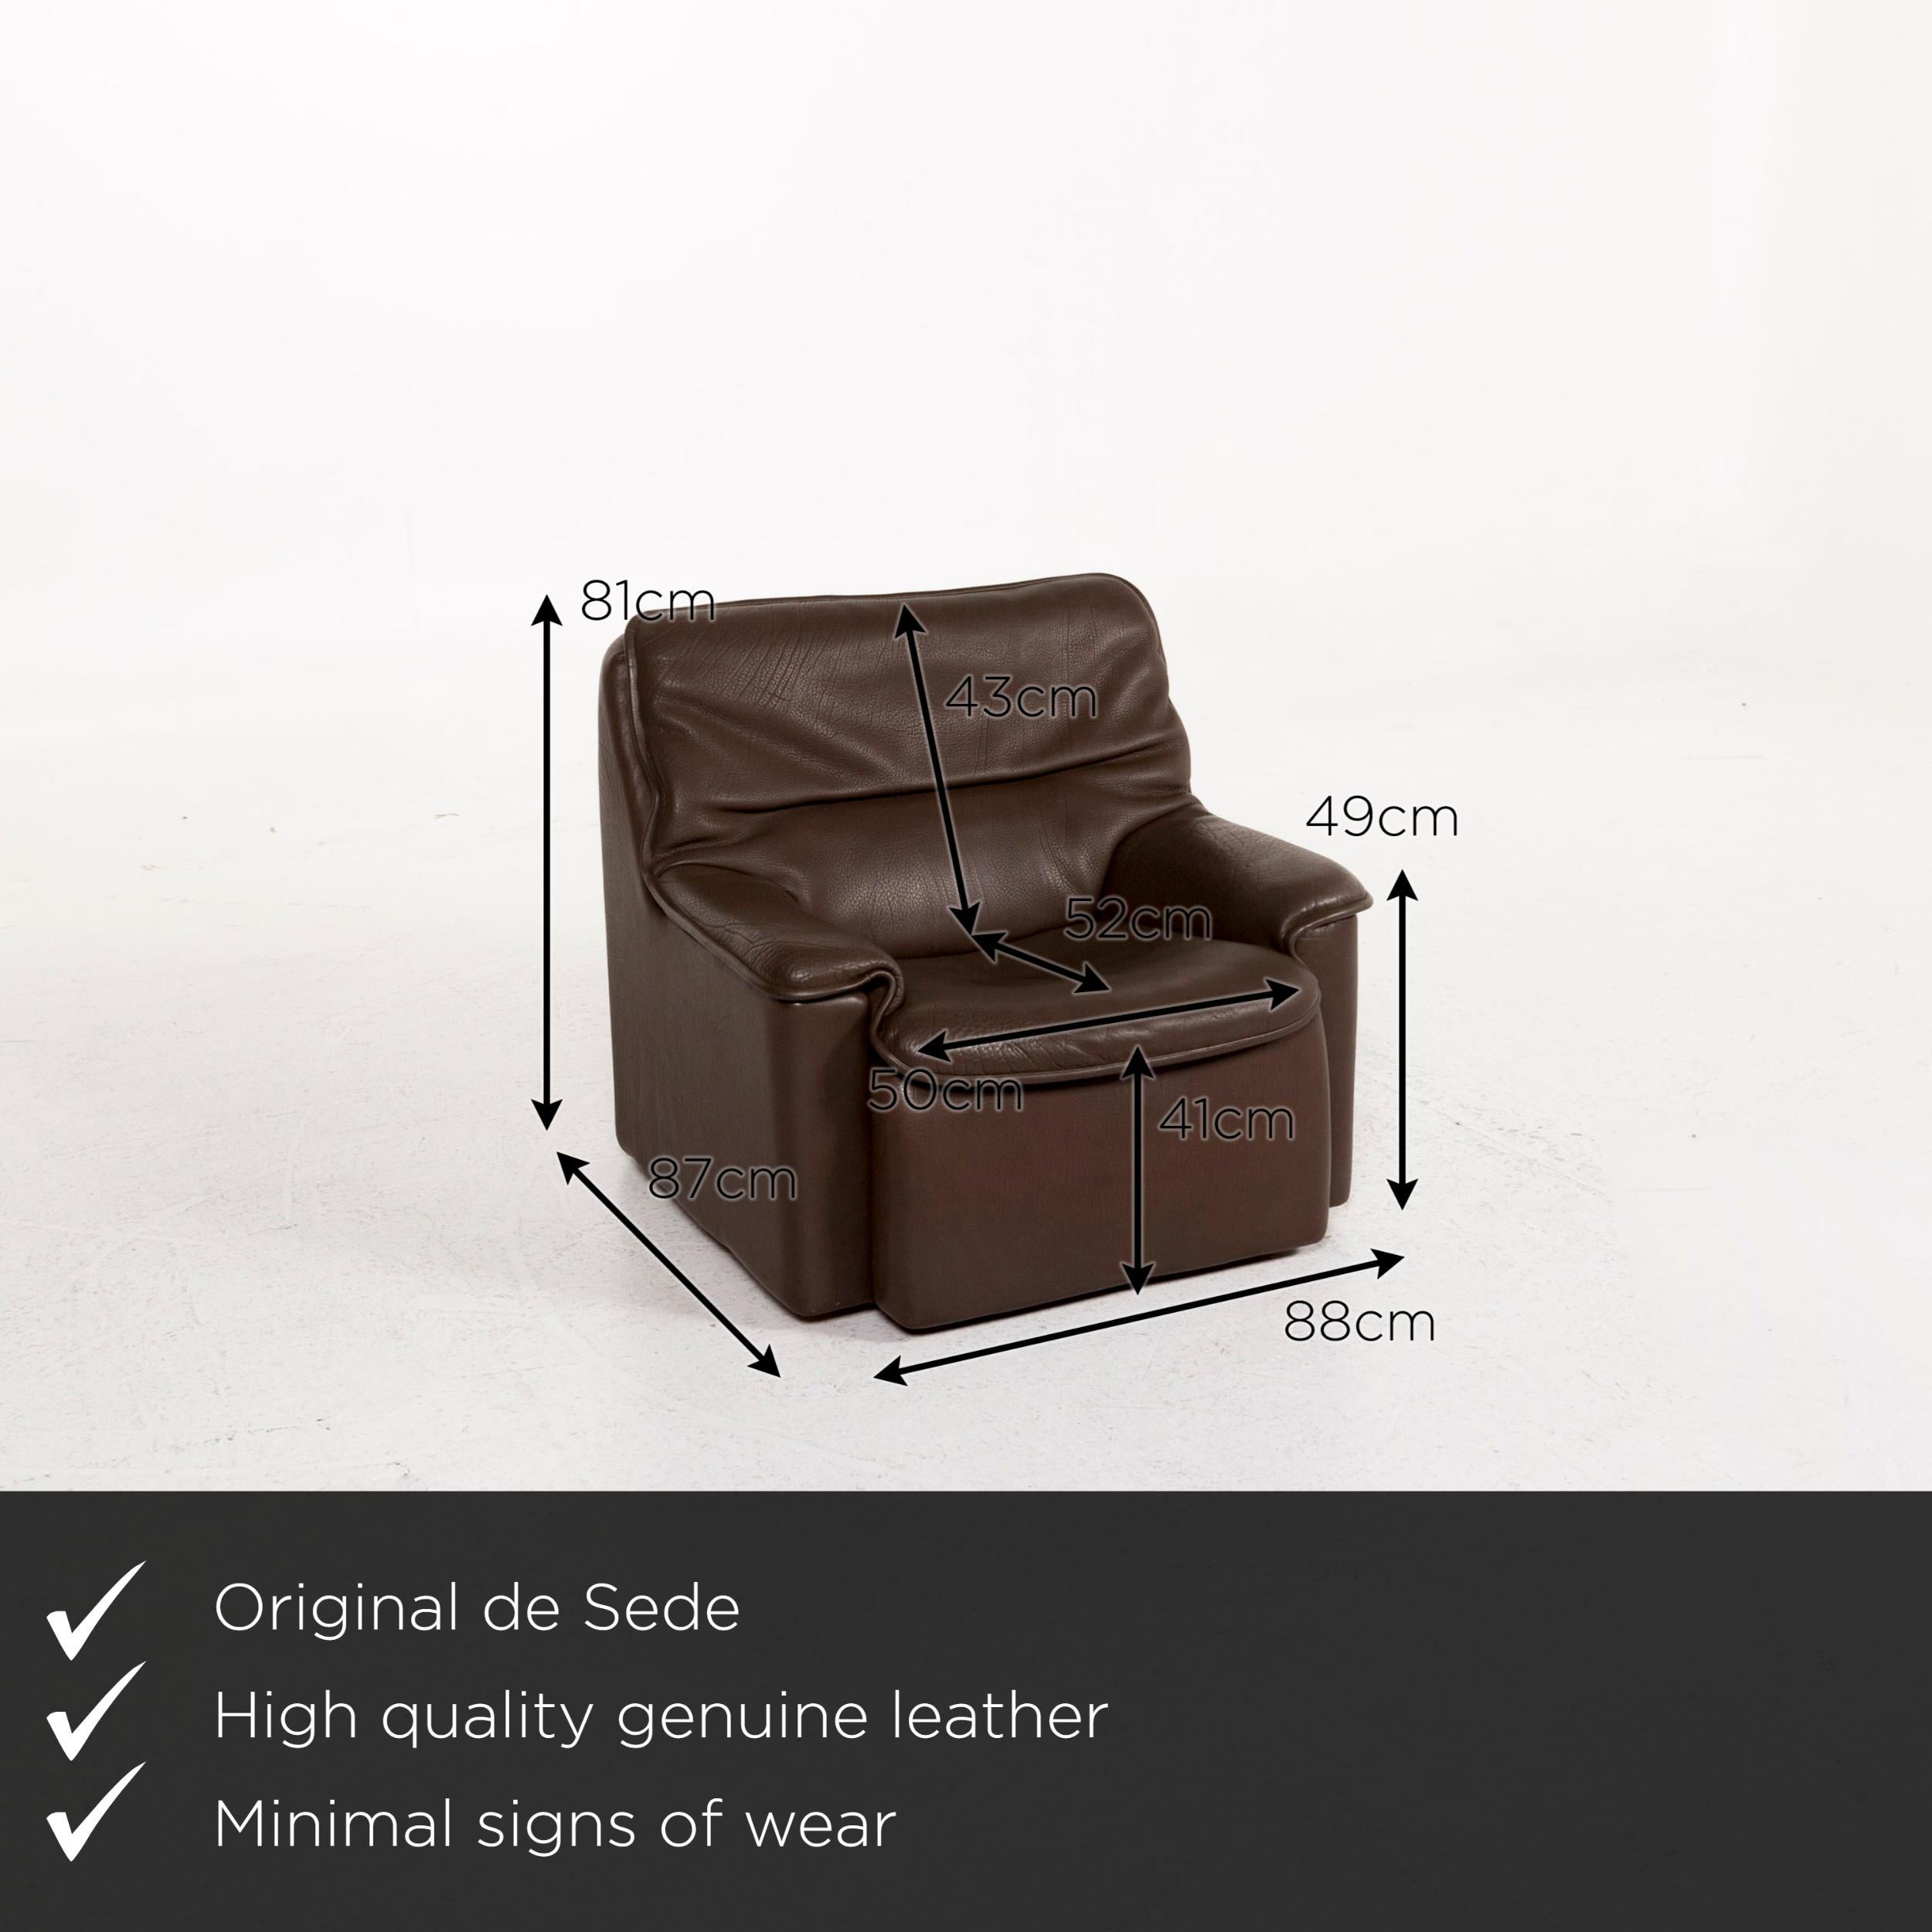 We present to you a De Sede leather armchair brown.
 

 Product measurements in centimeters:
 

Depth 87
Width 88
Height 81
Seat height 41
Rest height 49
Seat depth 52
Seat width 50
Back height 43.
 